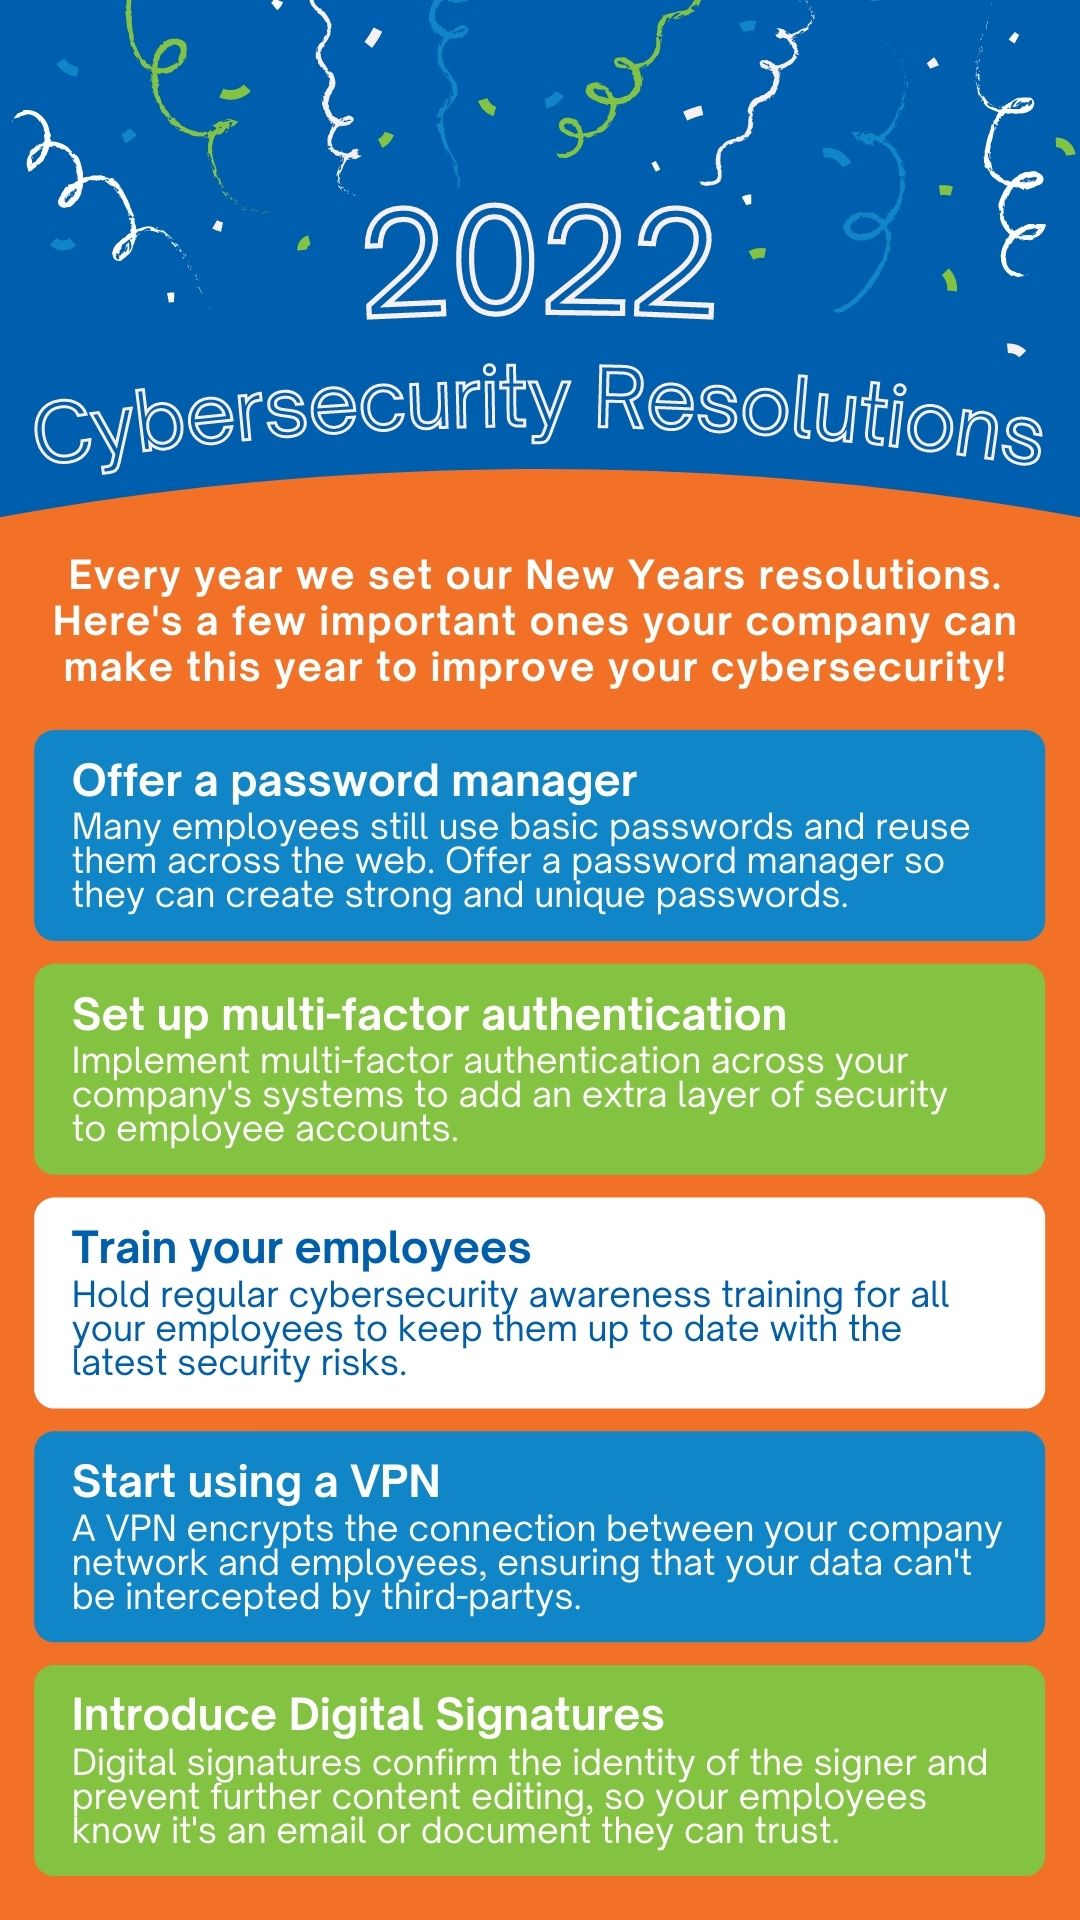 New Year Resolutions CyberSecurity